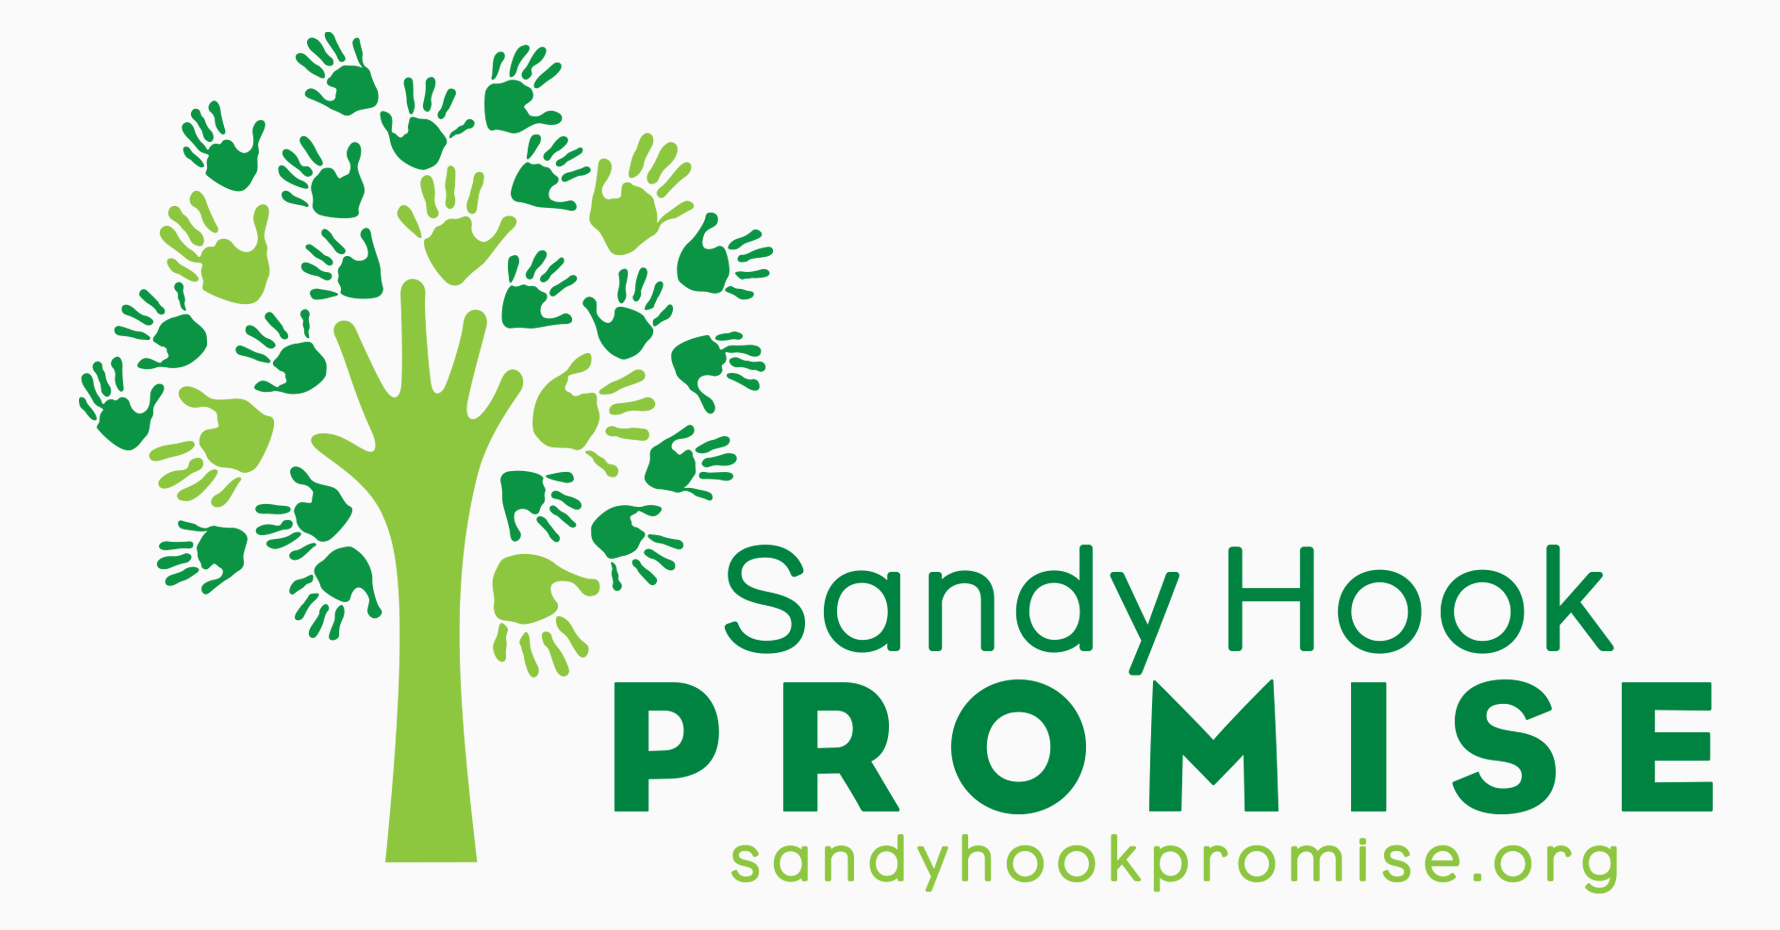 Sandy Hook Promise partners with Michigan Public Health to study anonymous reporting systems